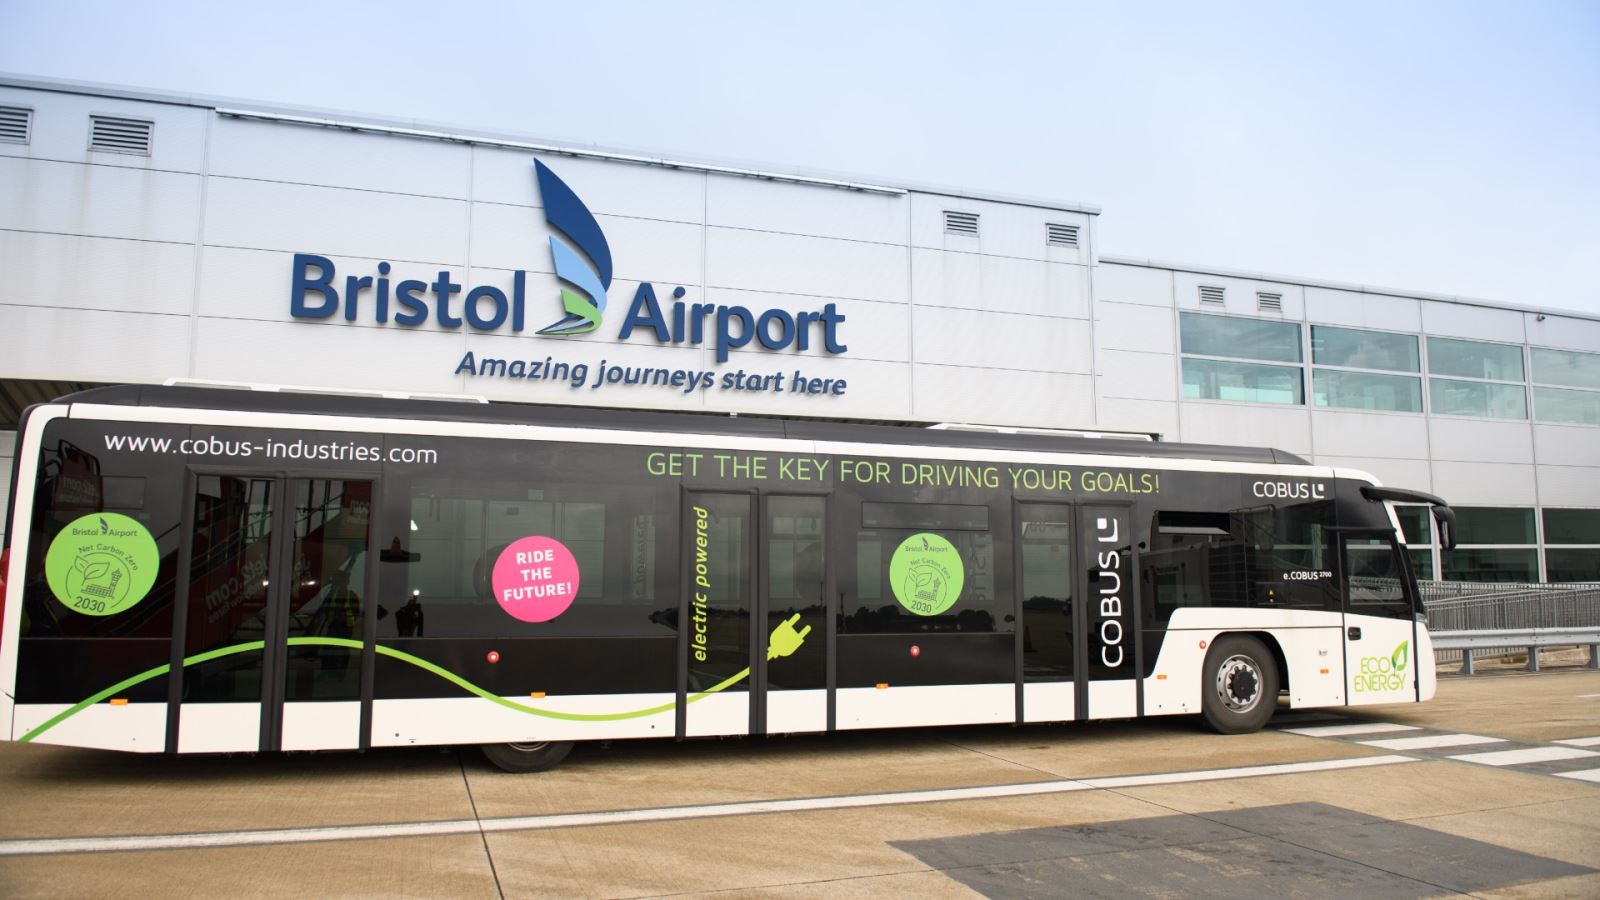 Electric Co-Bus infront of the Bristol Airport sign